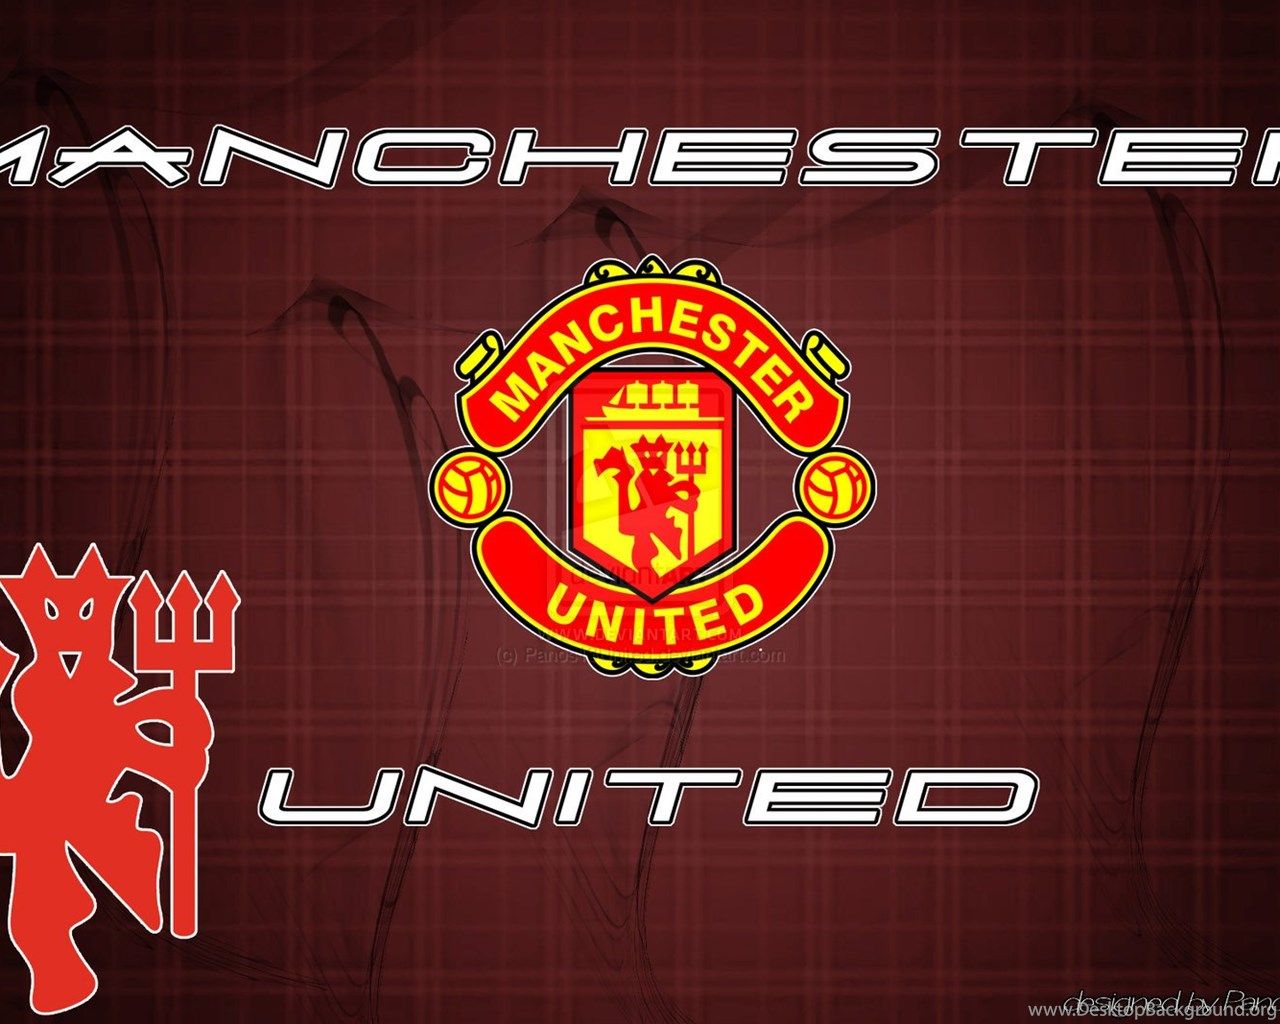 Manchester United F.C Wallpaper Hd, Photo And Image Desktop